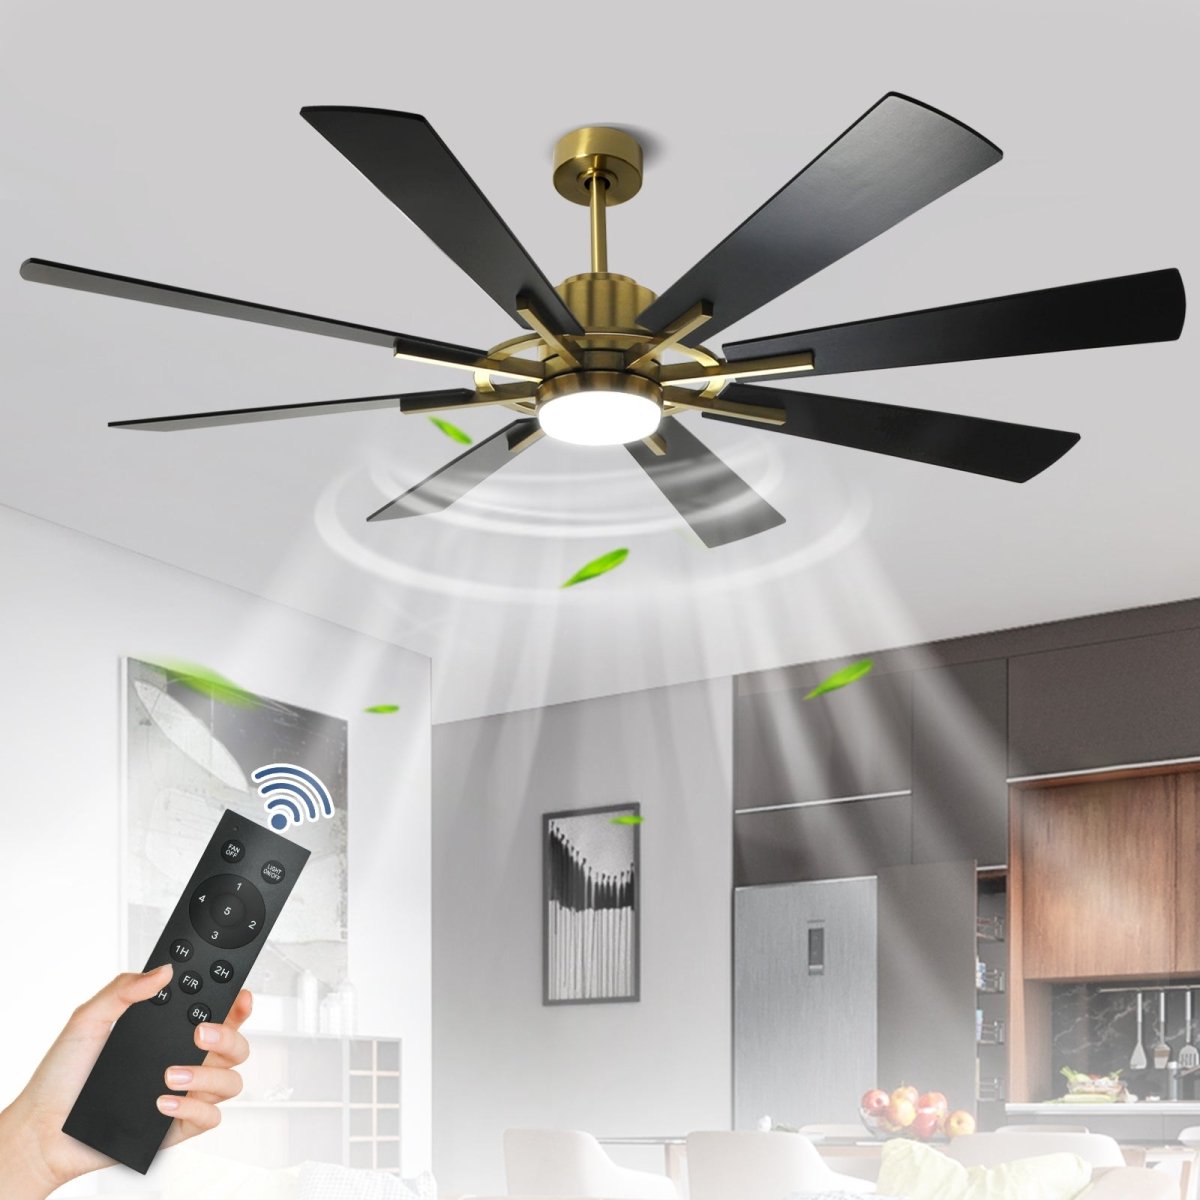 Depuley 60" Large Ceiling Fan with Light, Modern Black Gold Reversible Ceiling Fan with Light LED and 8 Plywood Blades, Outdoor DC Ceiling Fans with 5-Speed for Covered Patios, 3CCT 3000K-6000K, Timer - WS-FPZ44-18C-CO 1 | DEPULEY